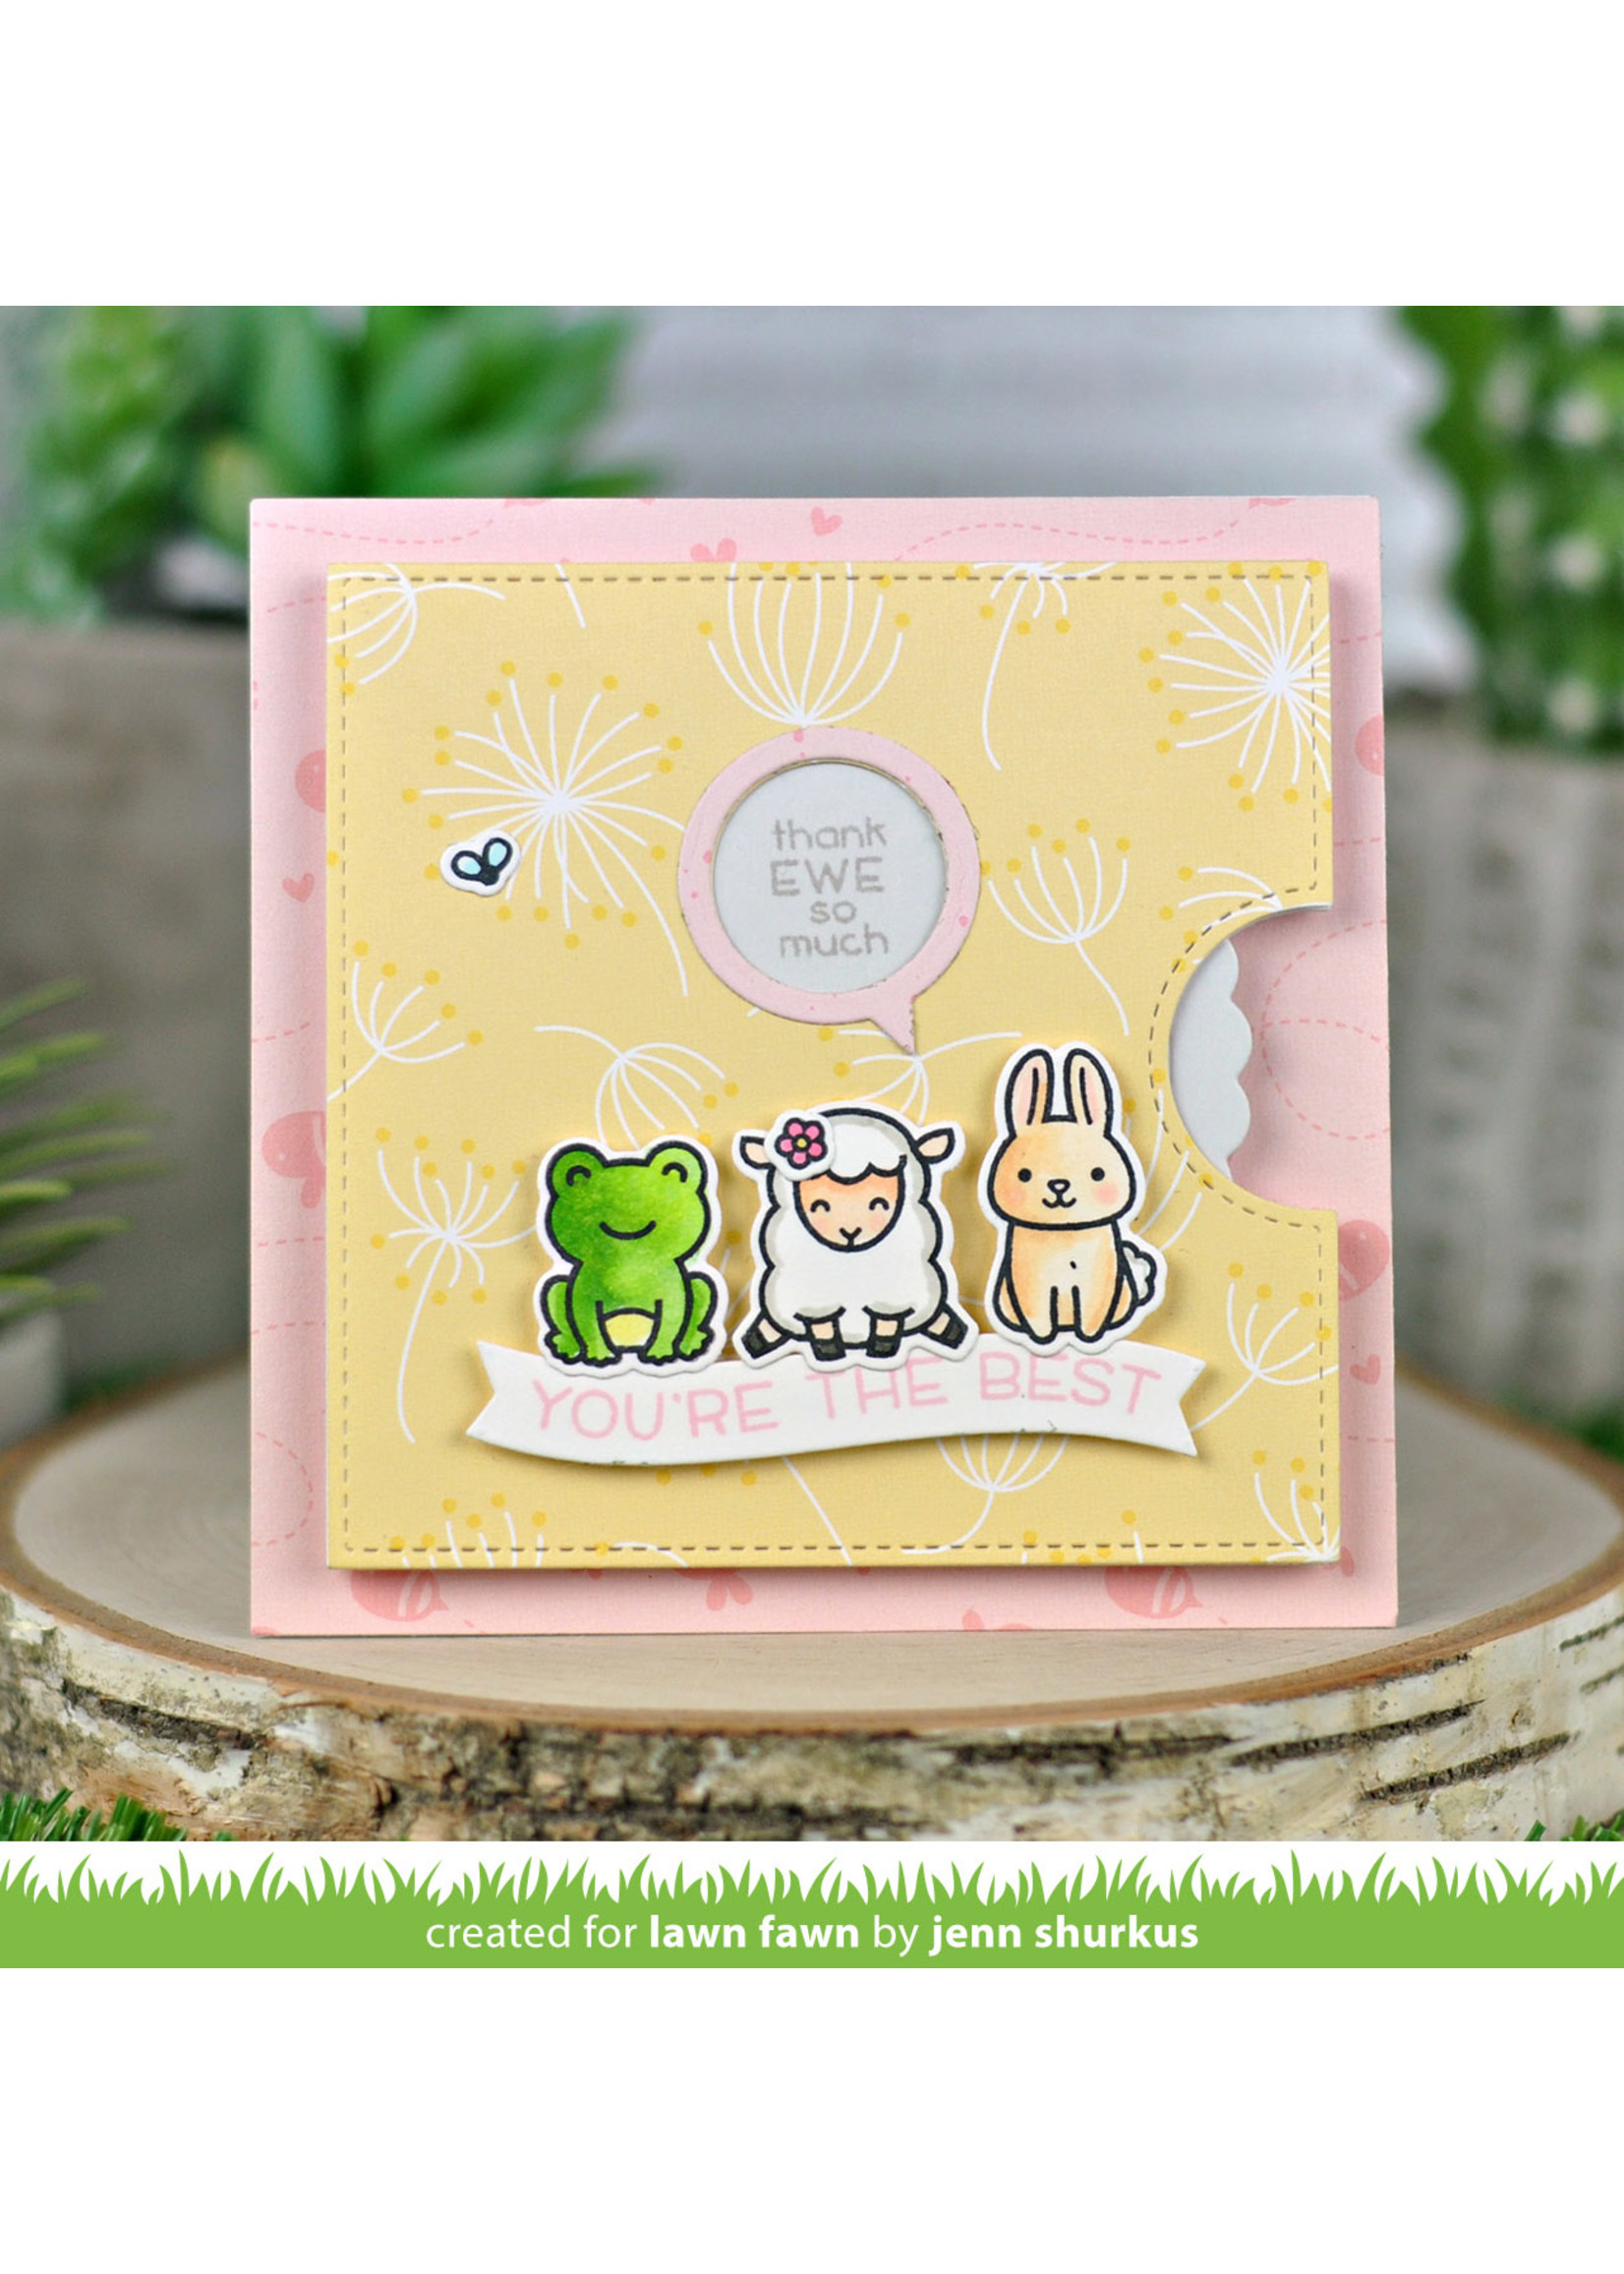 Lawn Fawn Stamp say what? spring critters